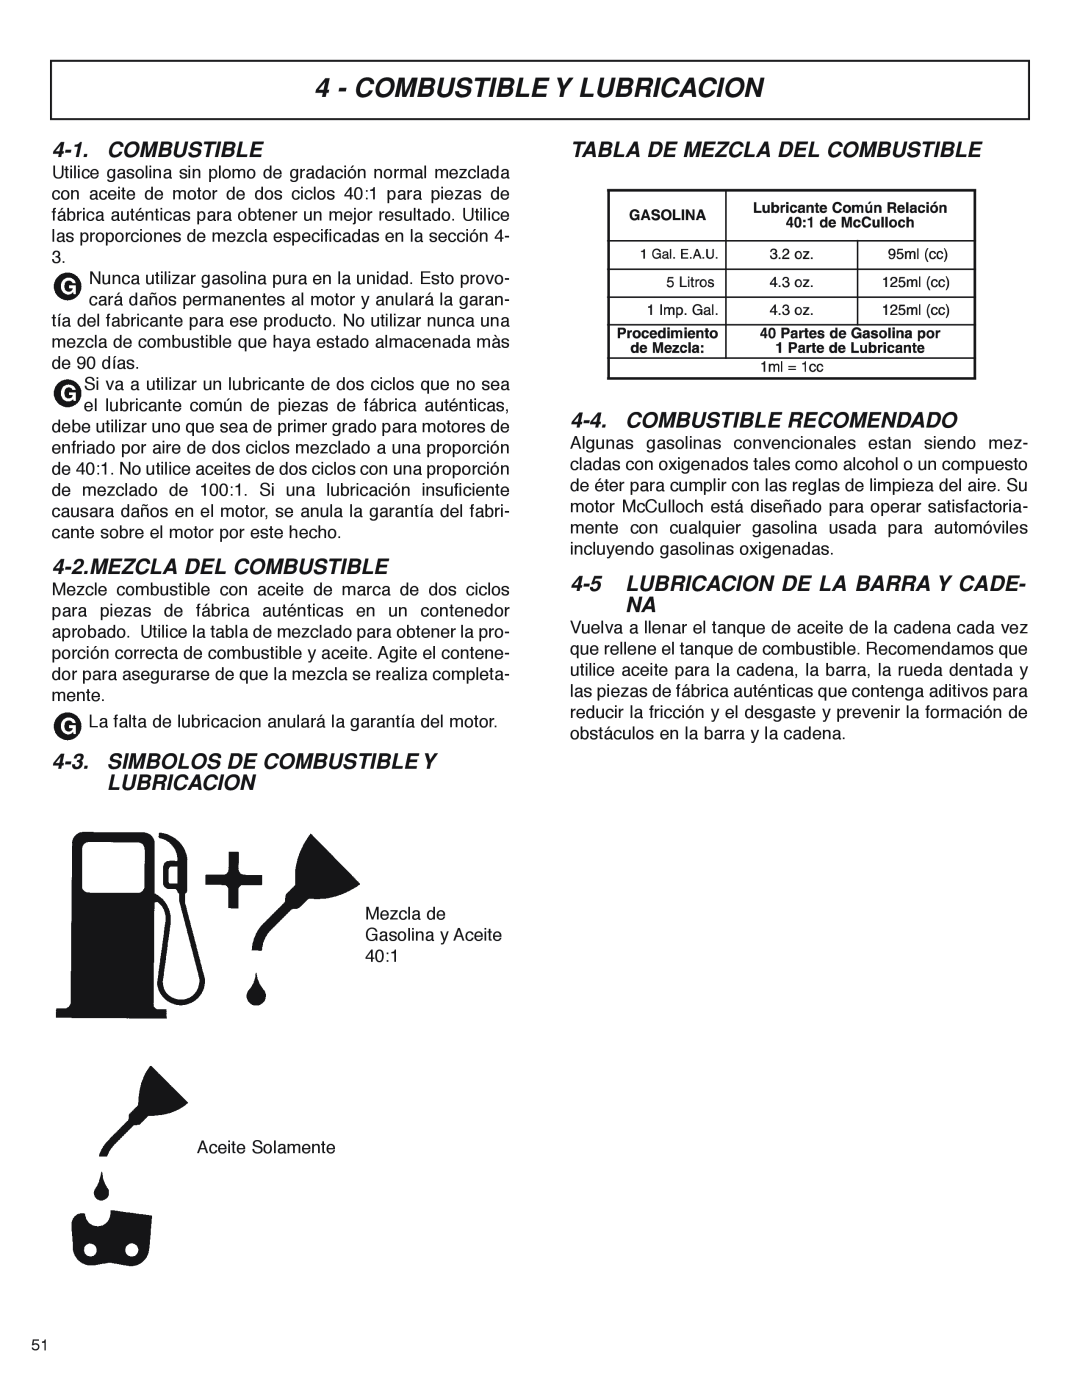 McCulloch MS4016PAVCC, MS4018PAVCC Combustible Y Lubricacion, Mezcla Del Combustible, Lubricacion De La Barra Y Cade- Na 